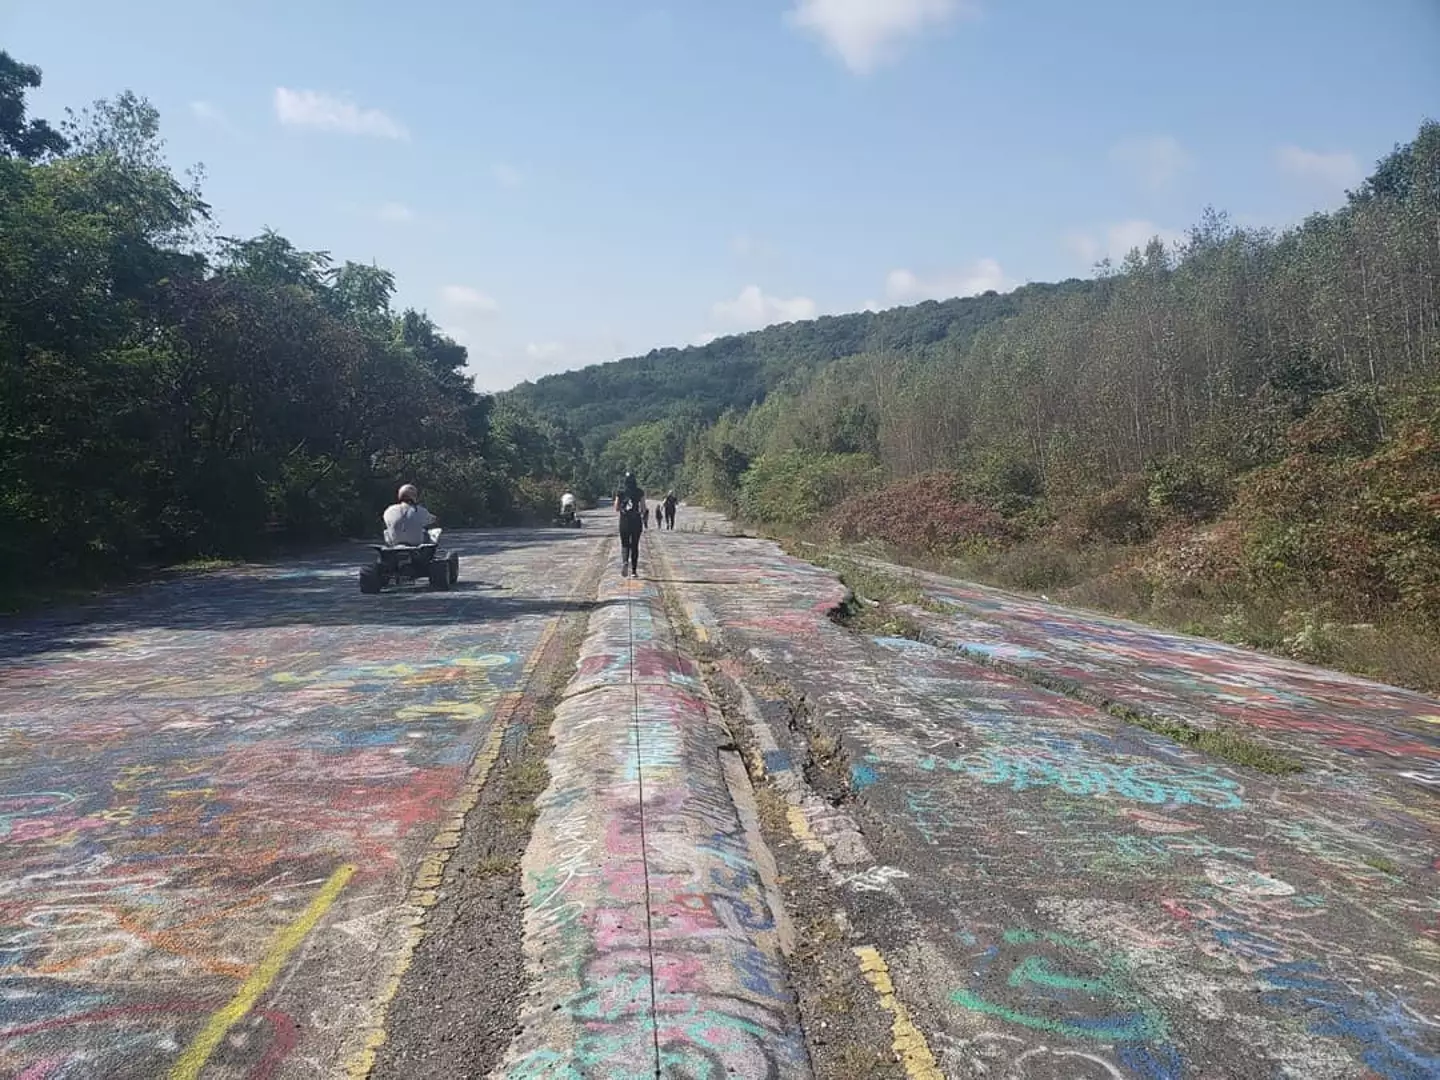 Centralia's 'Graffiti Highway' has become a tourist attraction in itself (